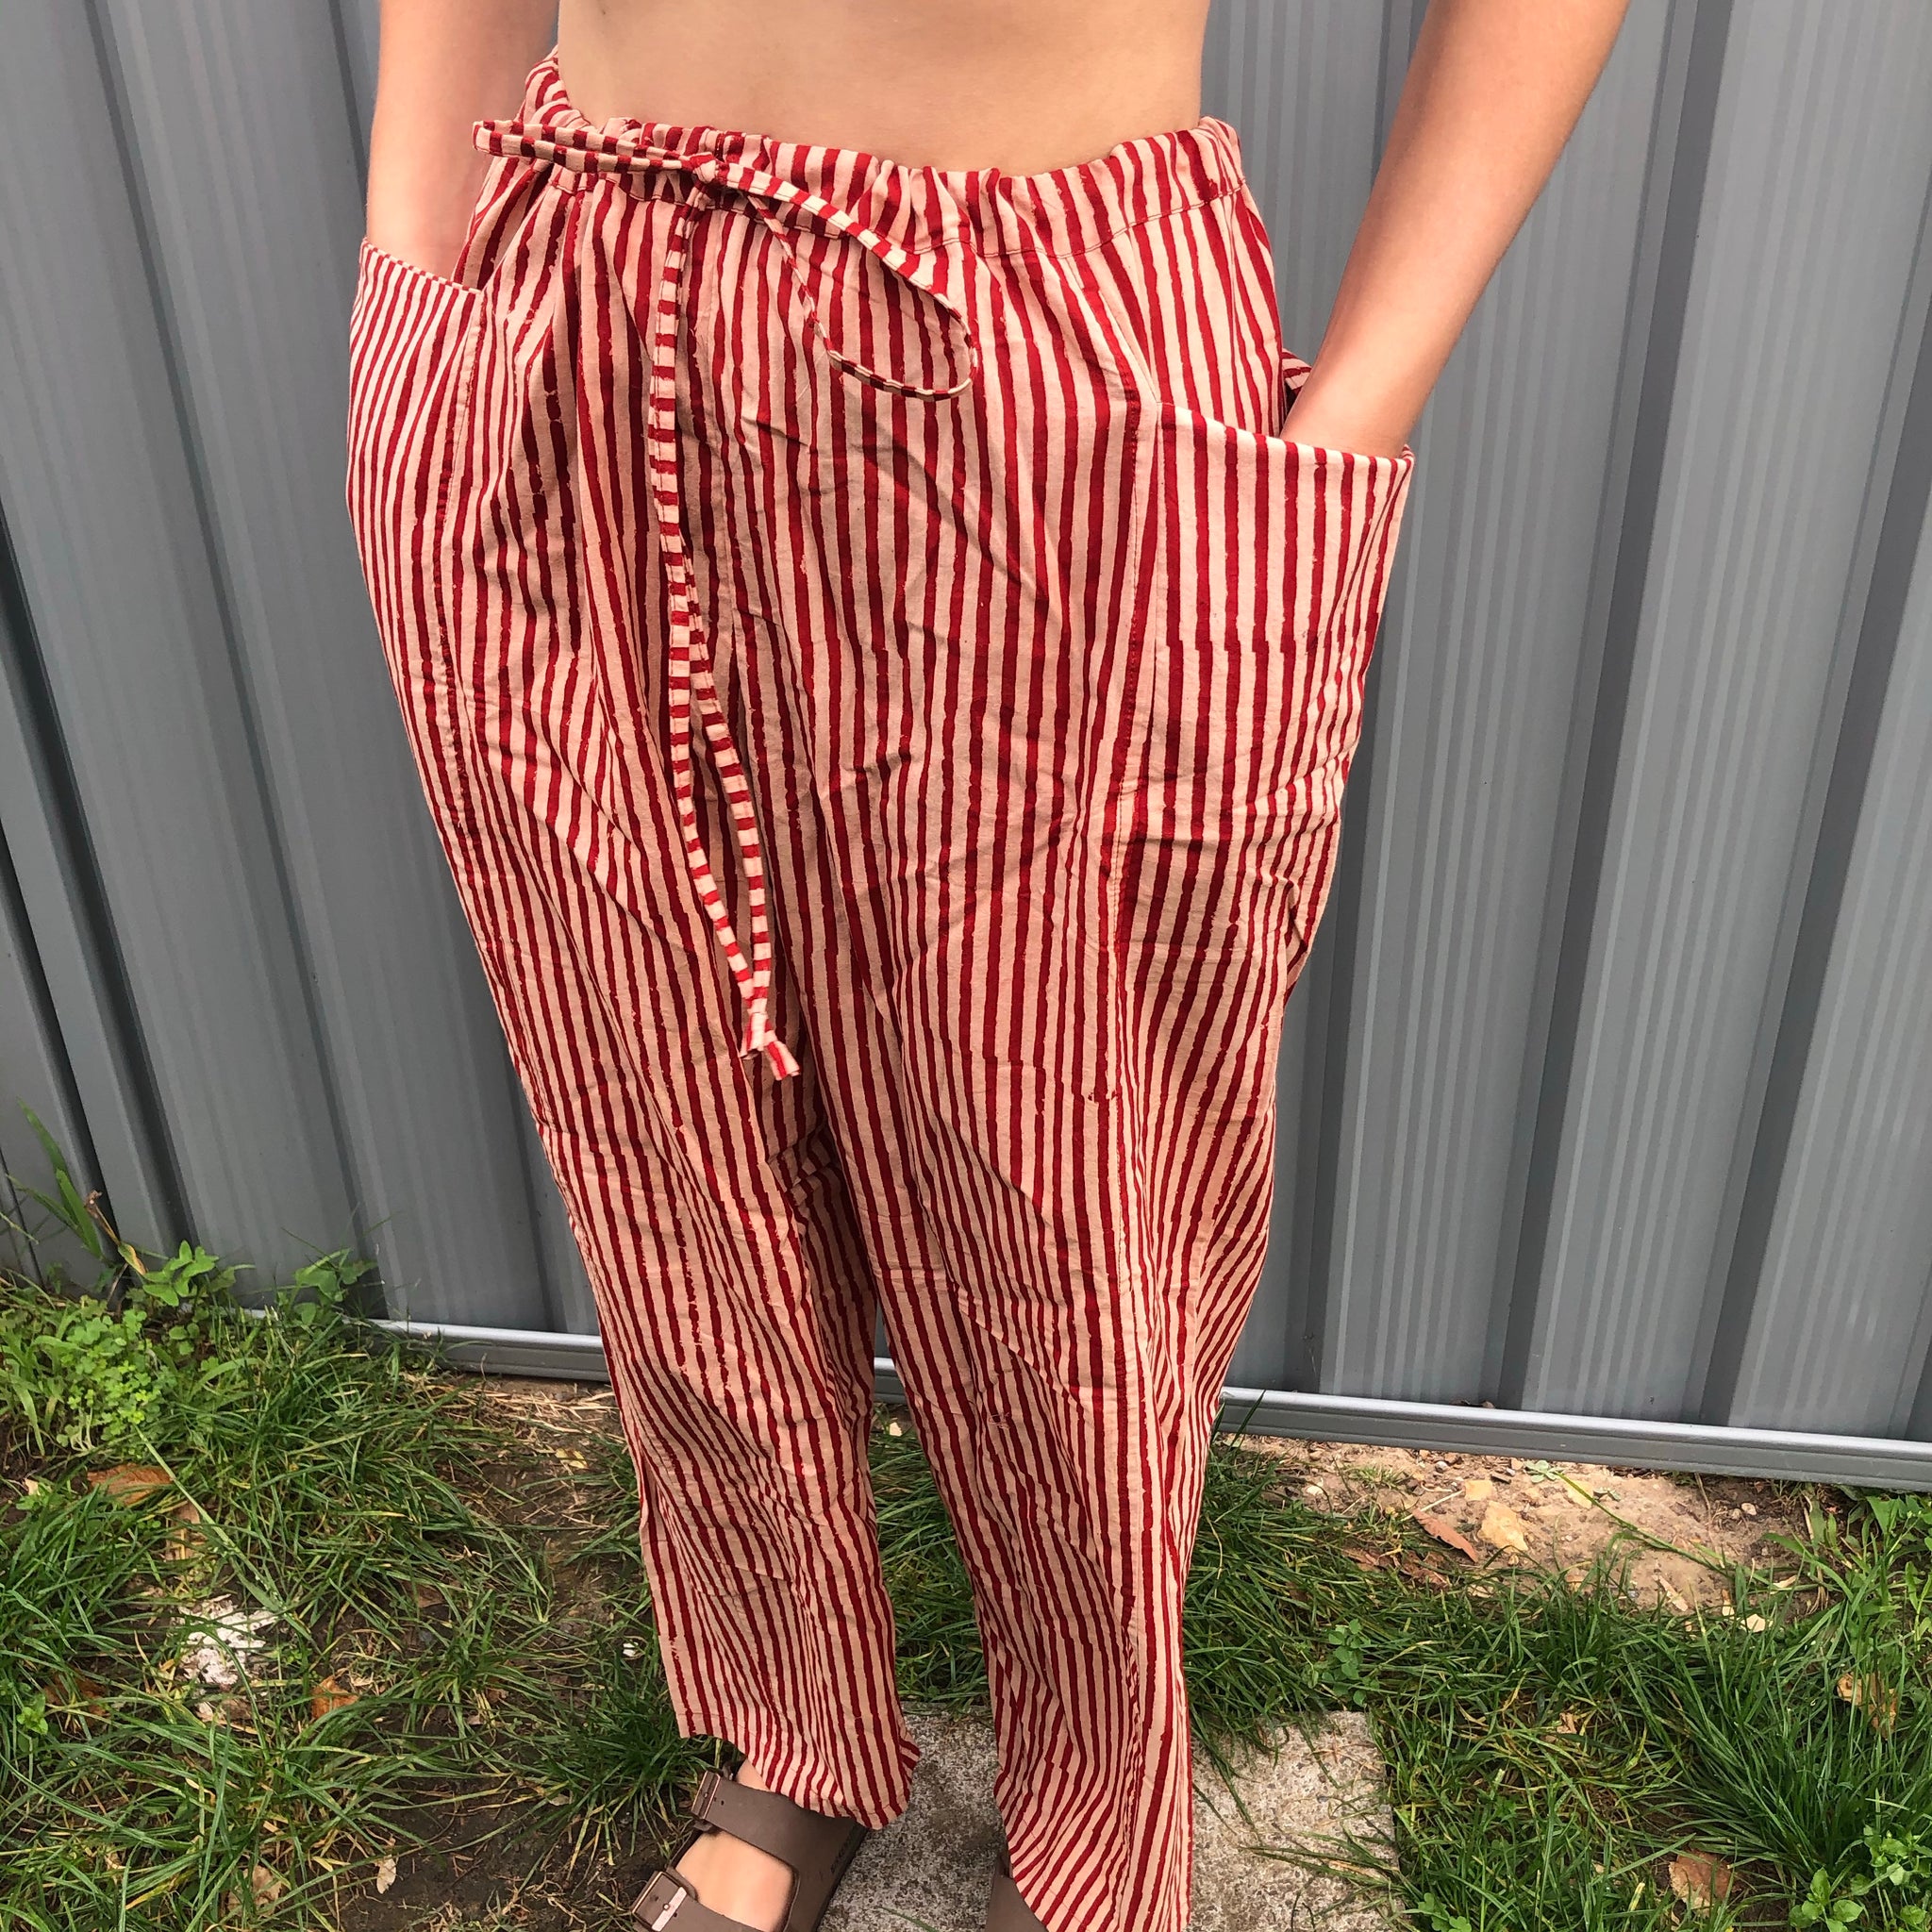 Fair Trade Ethical Striped Cotton Striped Pants in Red